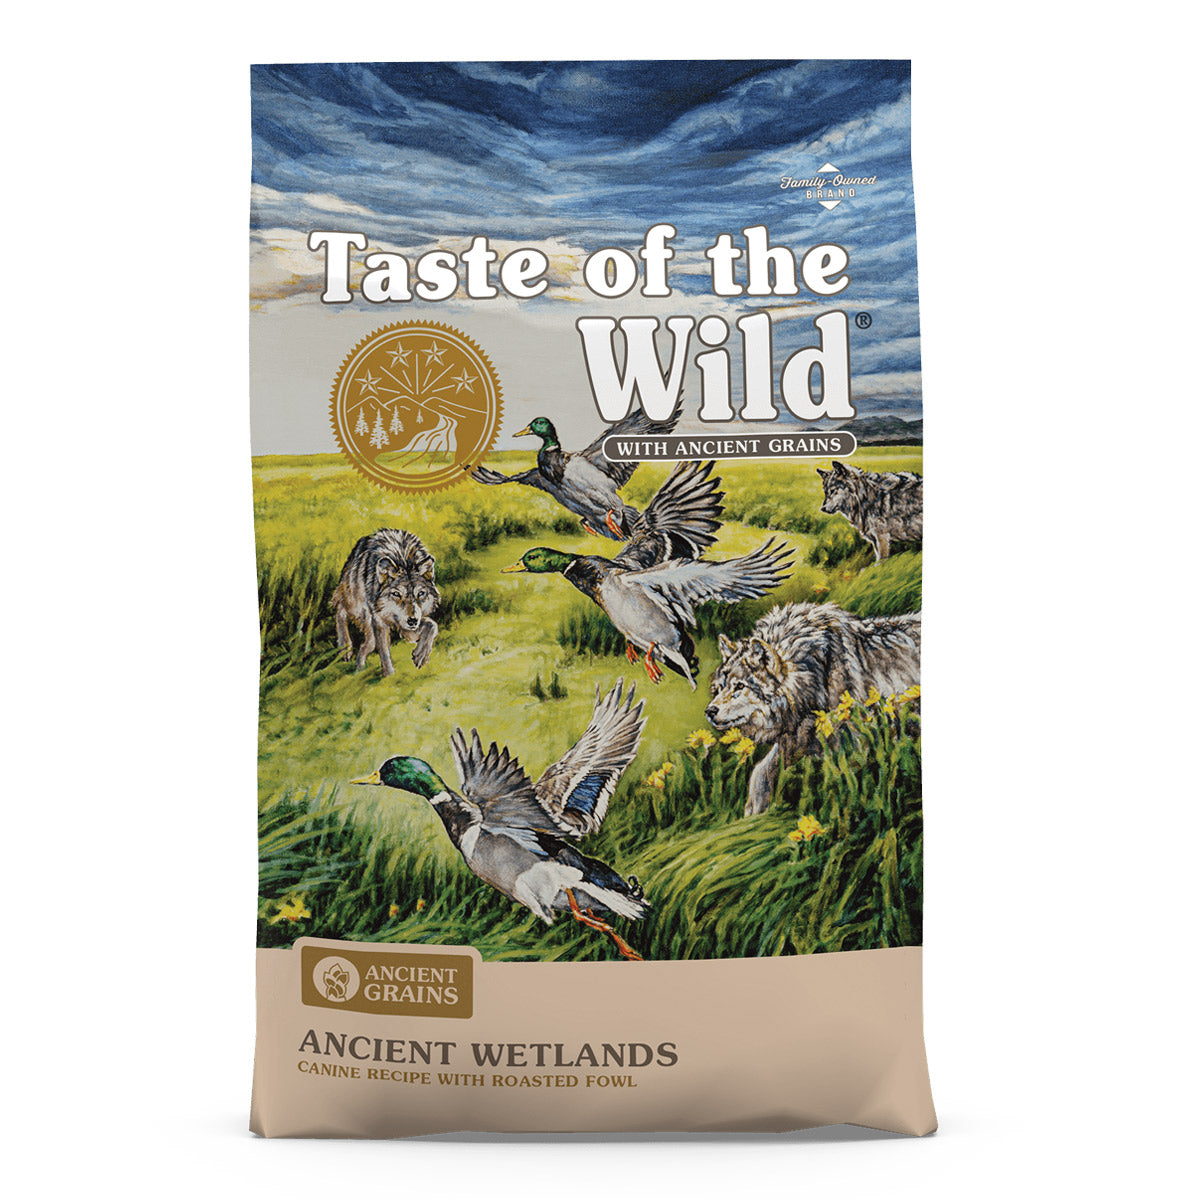 TASTE OF THE WILD Ancient Wetlands Canine Recipe